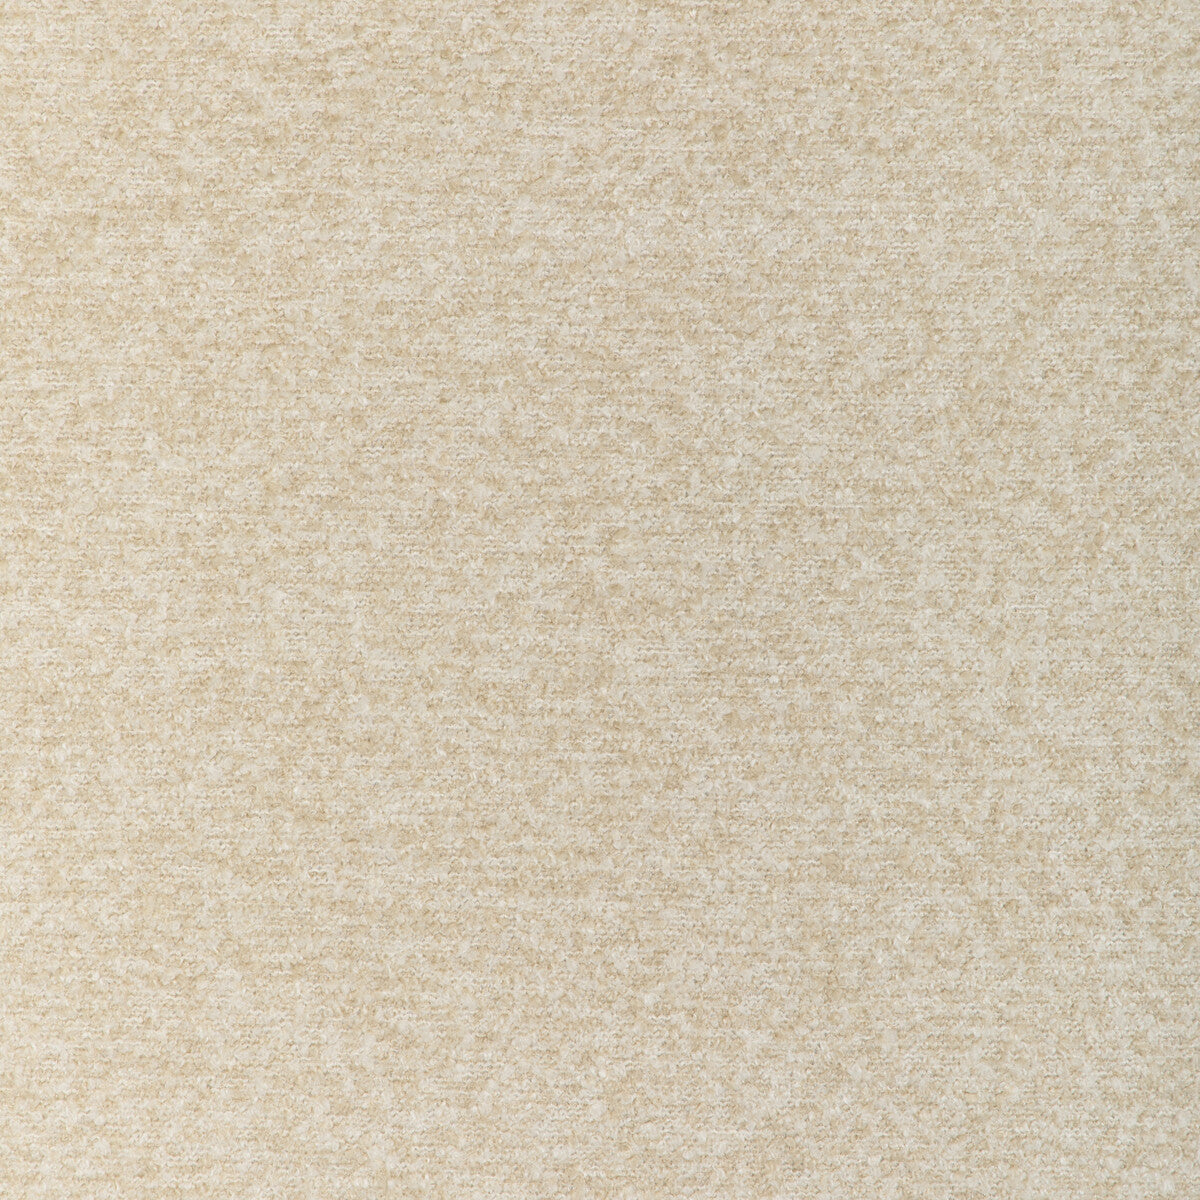 Rohe Boucle fabric in sand color - pattern 36952.16.0 - by Kravet Basics in the Mid-Century Modern collection